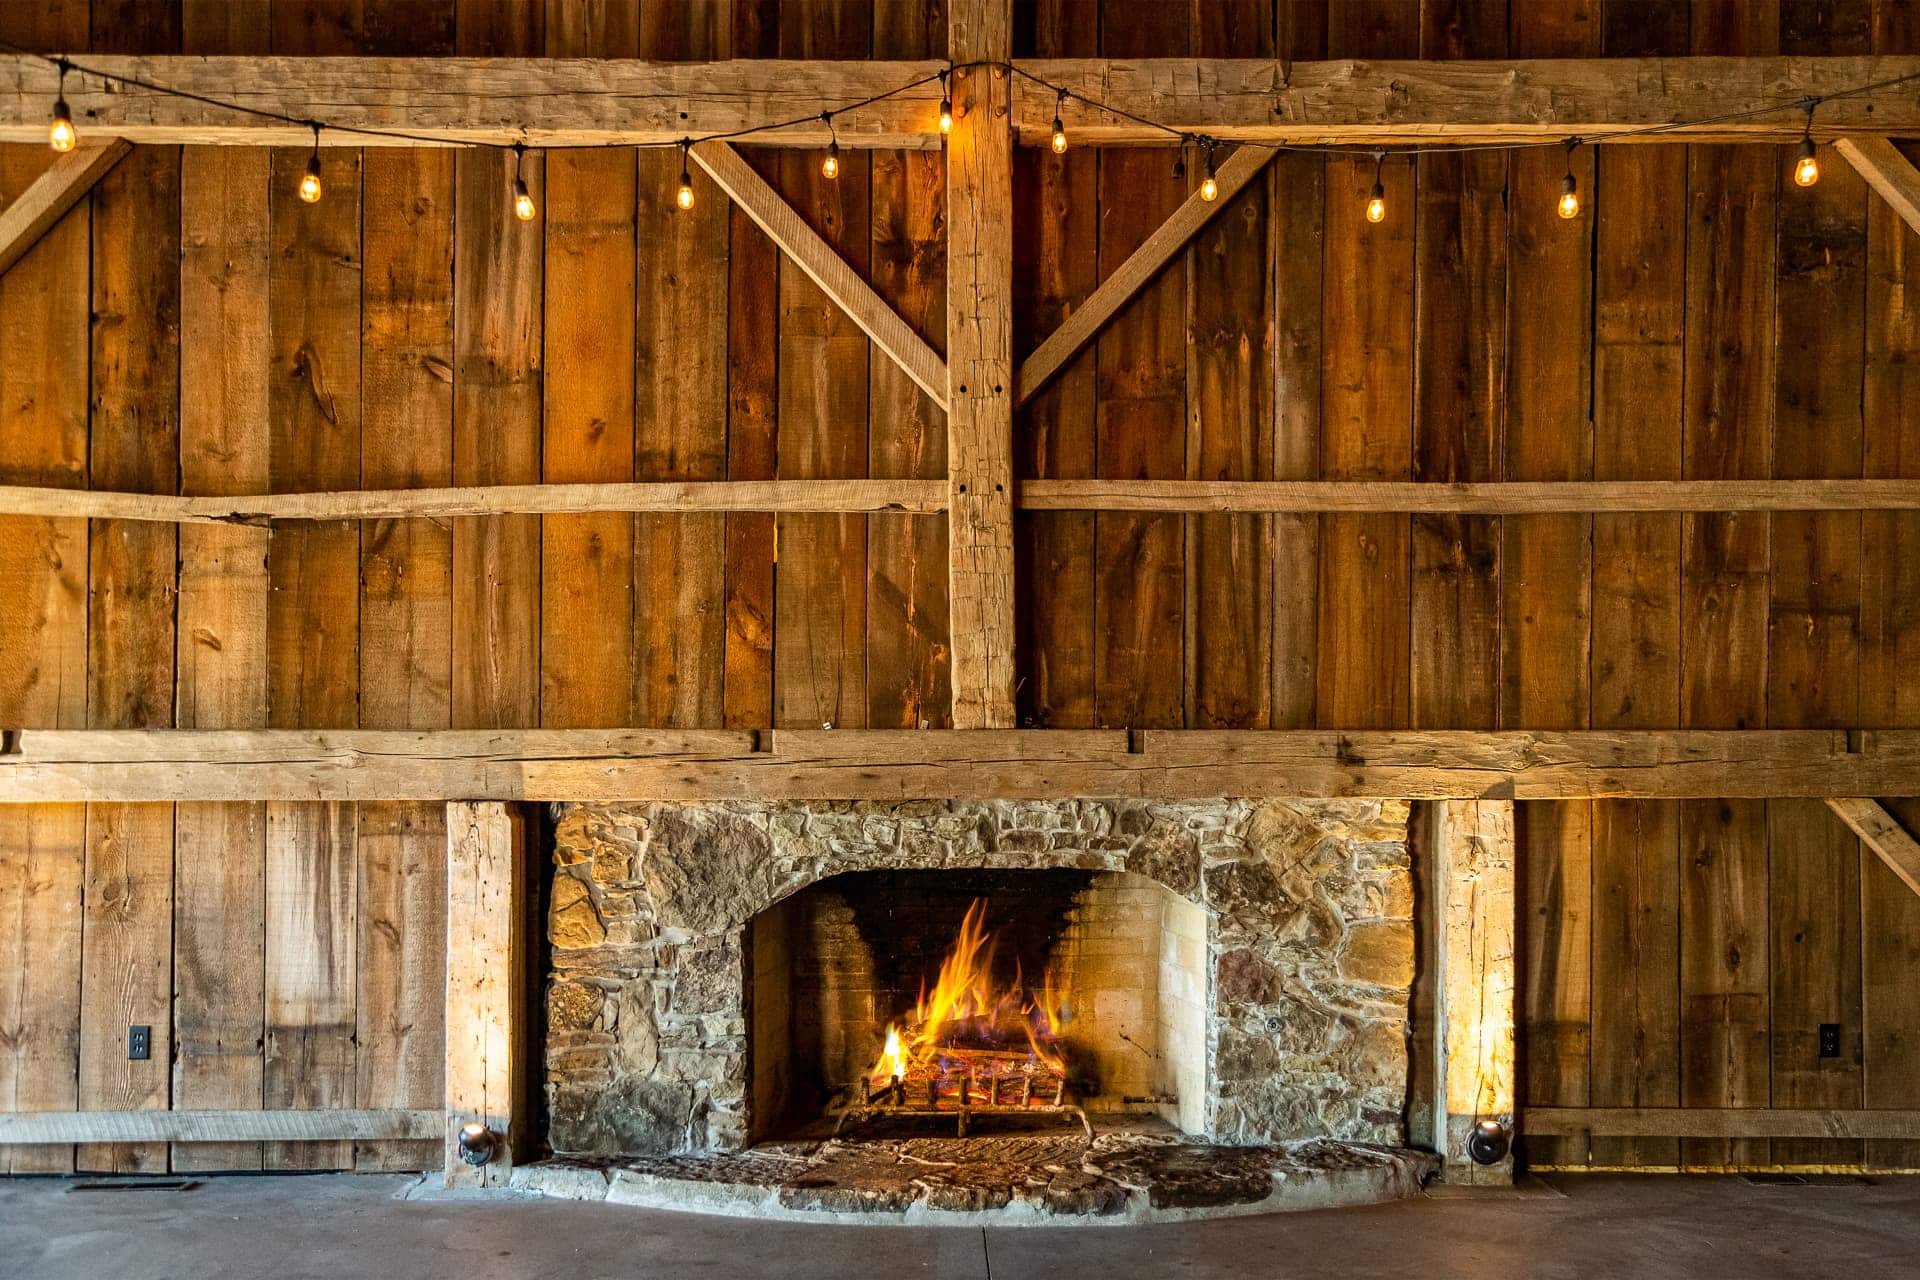 Fireplace in the Barn at Esperanza Ranch